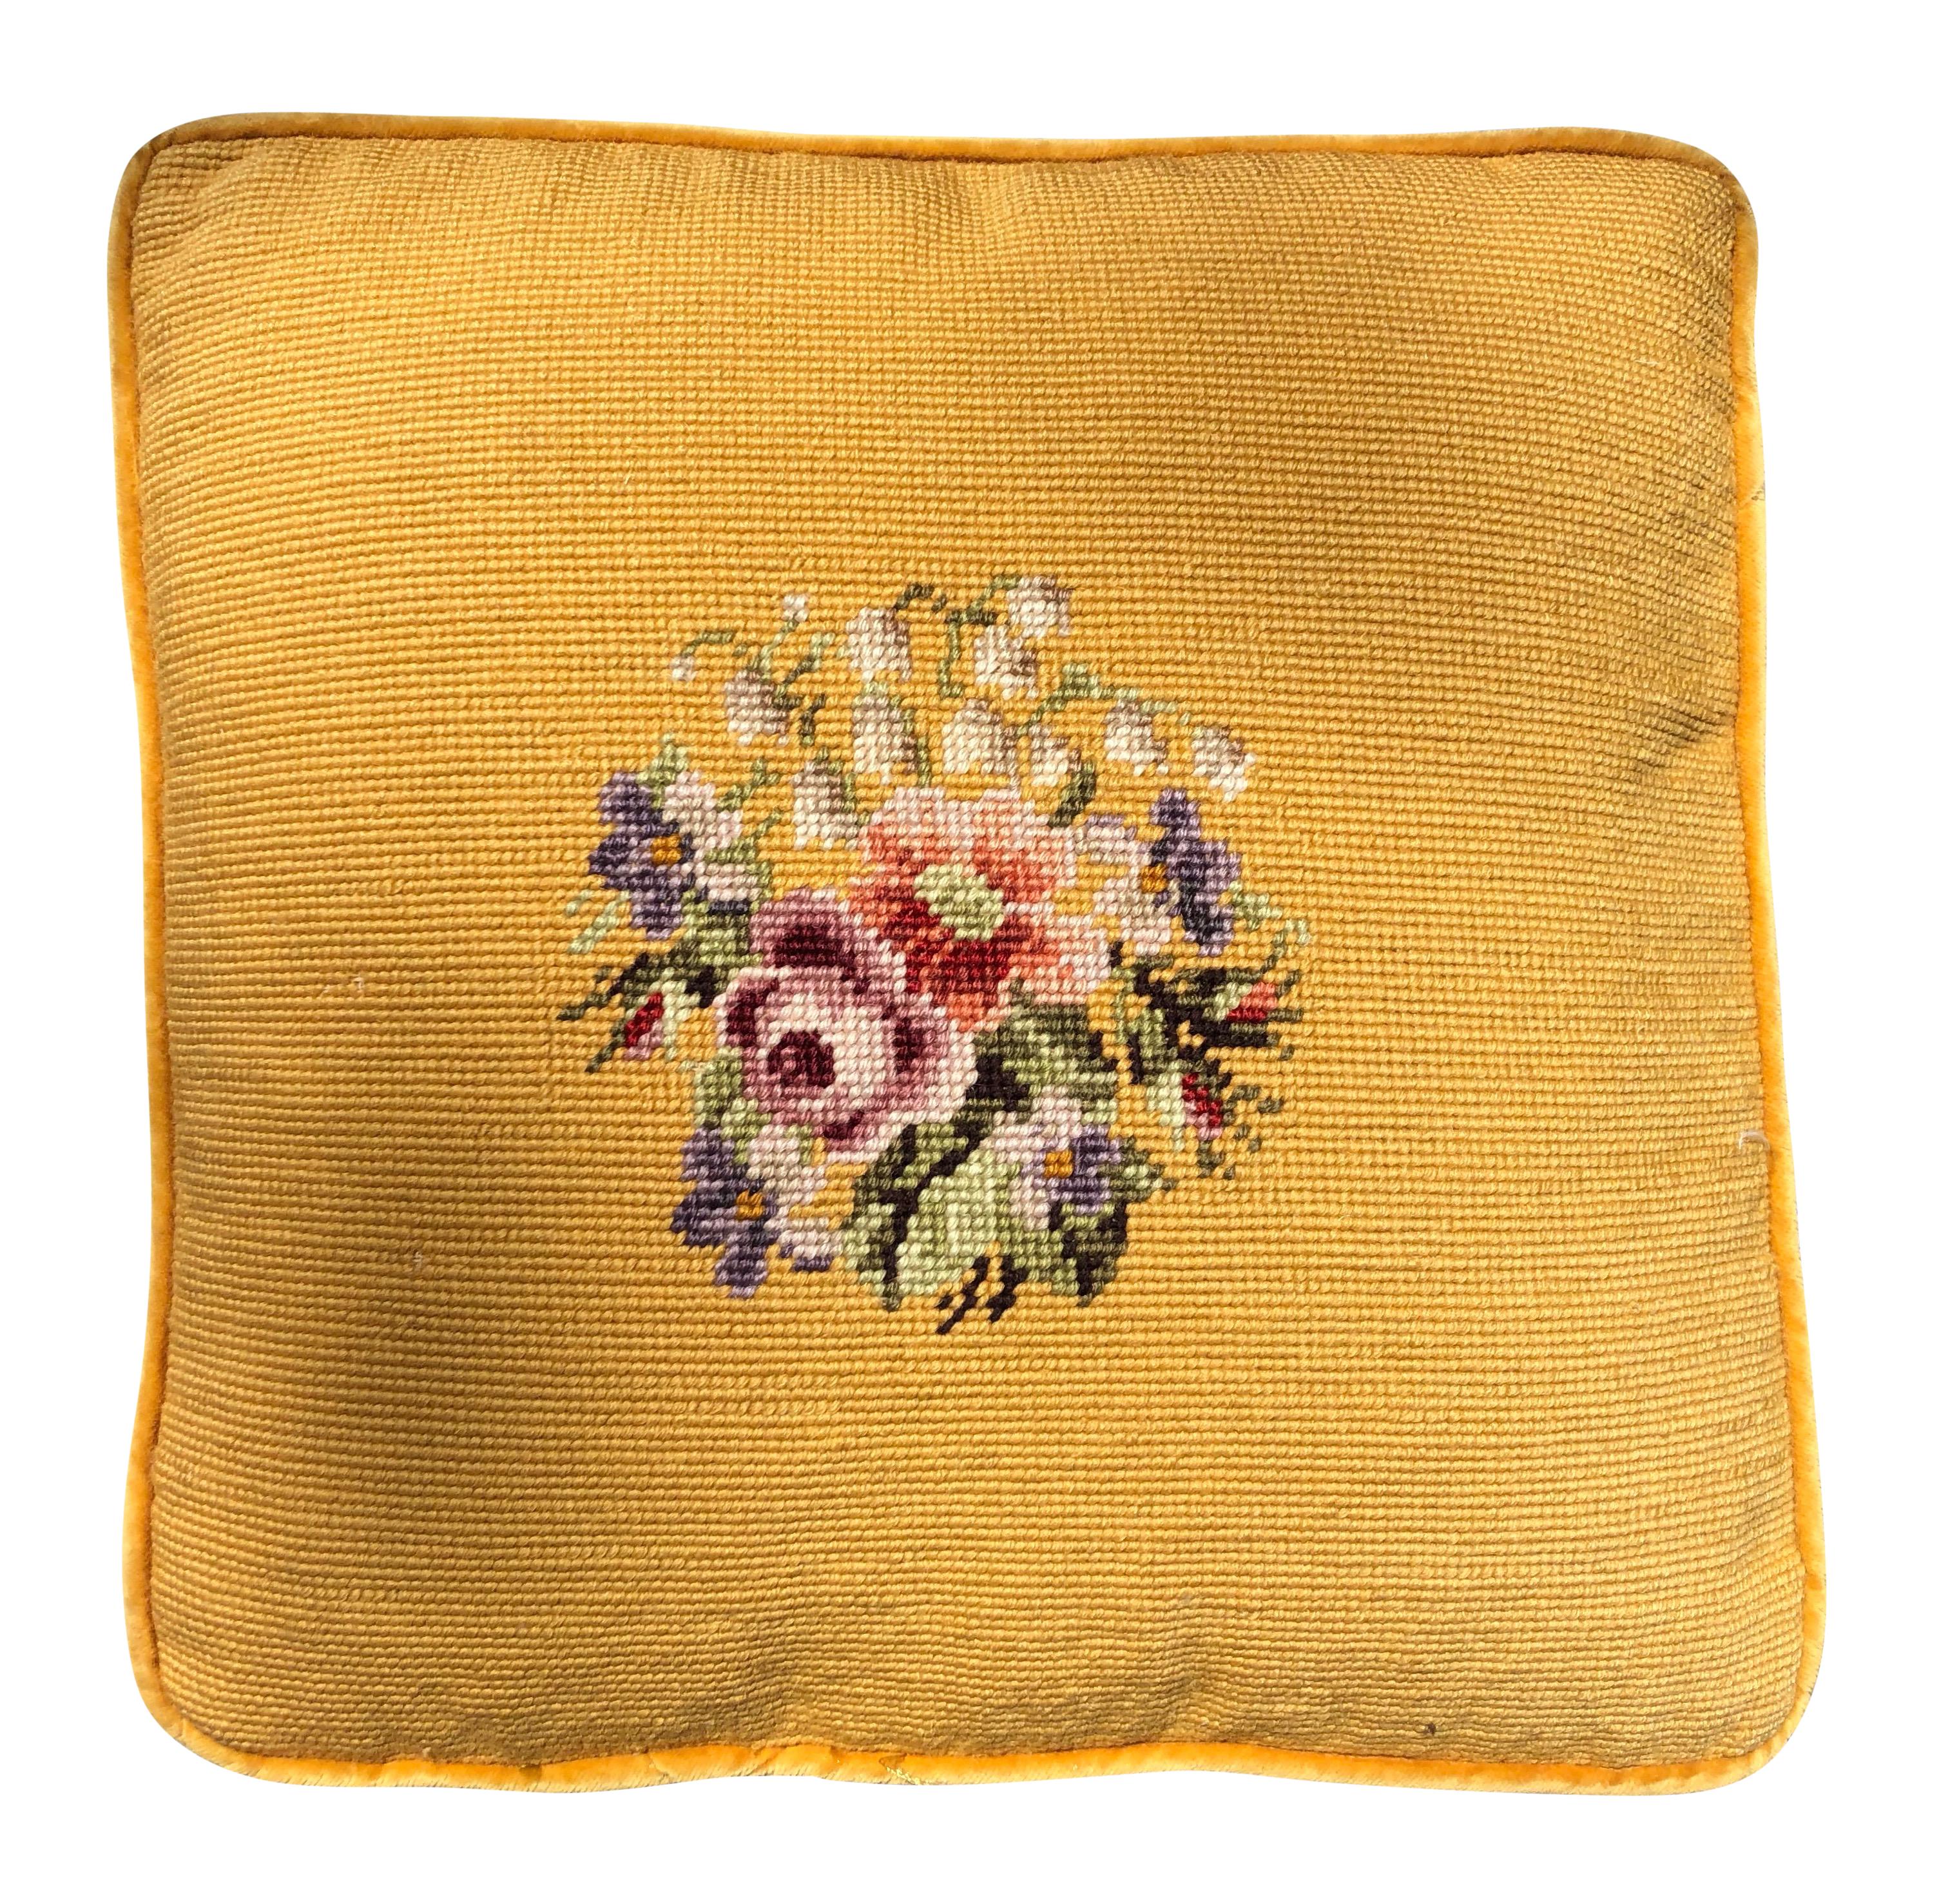 Pair of Yellow Needlepoint Embroidered Throw Pillows with Floral Motif In Good Condition For Sale In Petaluma, CA